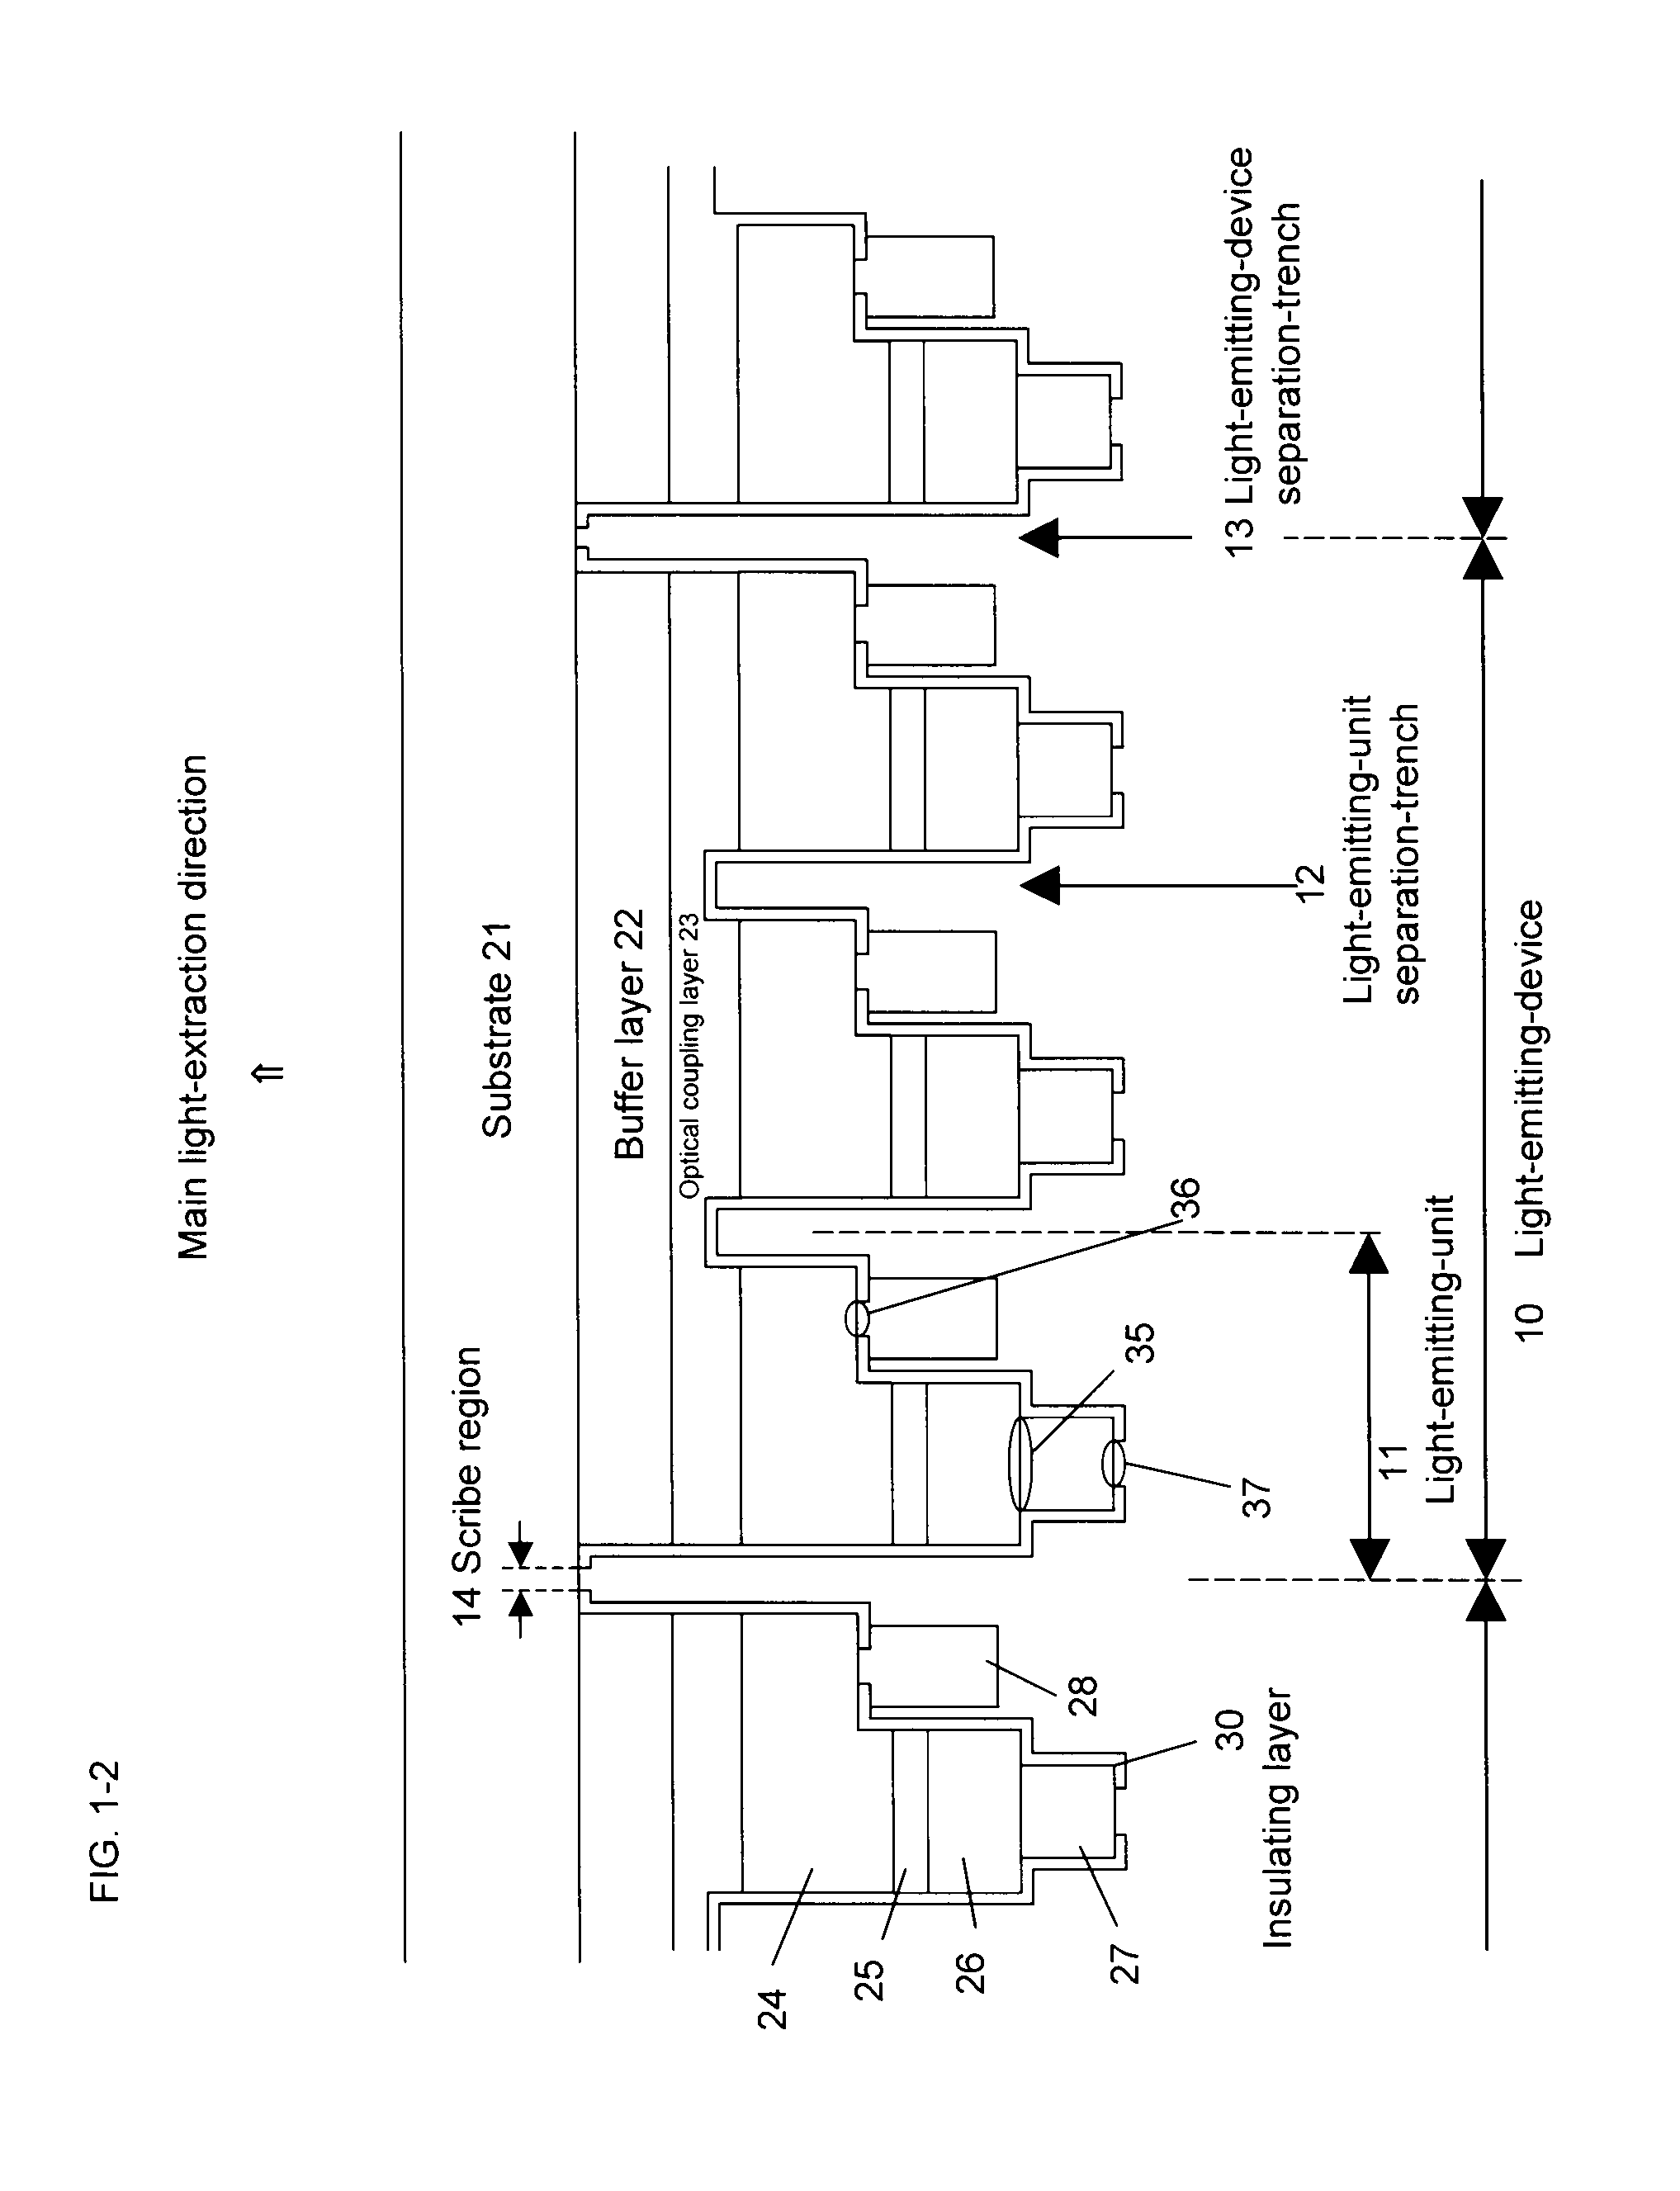 Integrated semiconductor light-emitting device and its manufacturing method